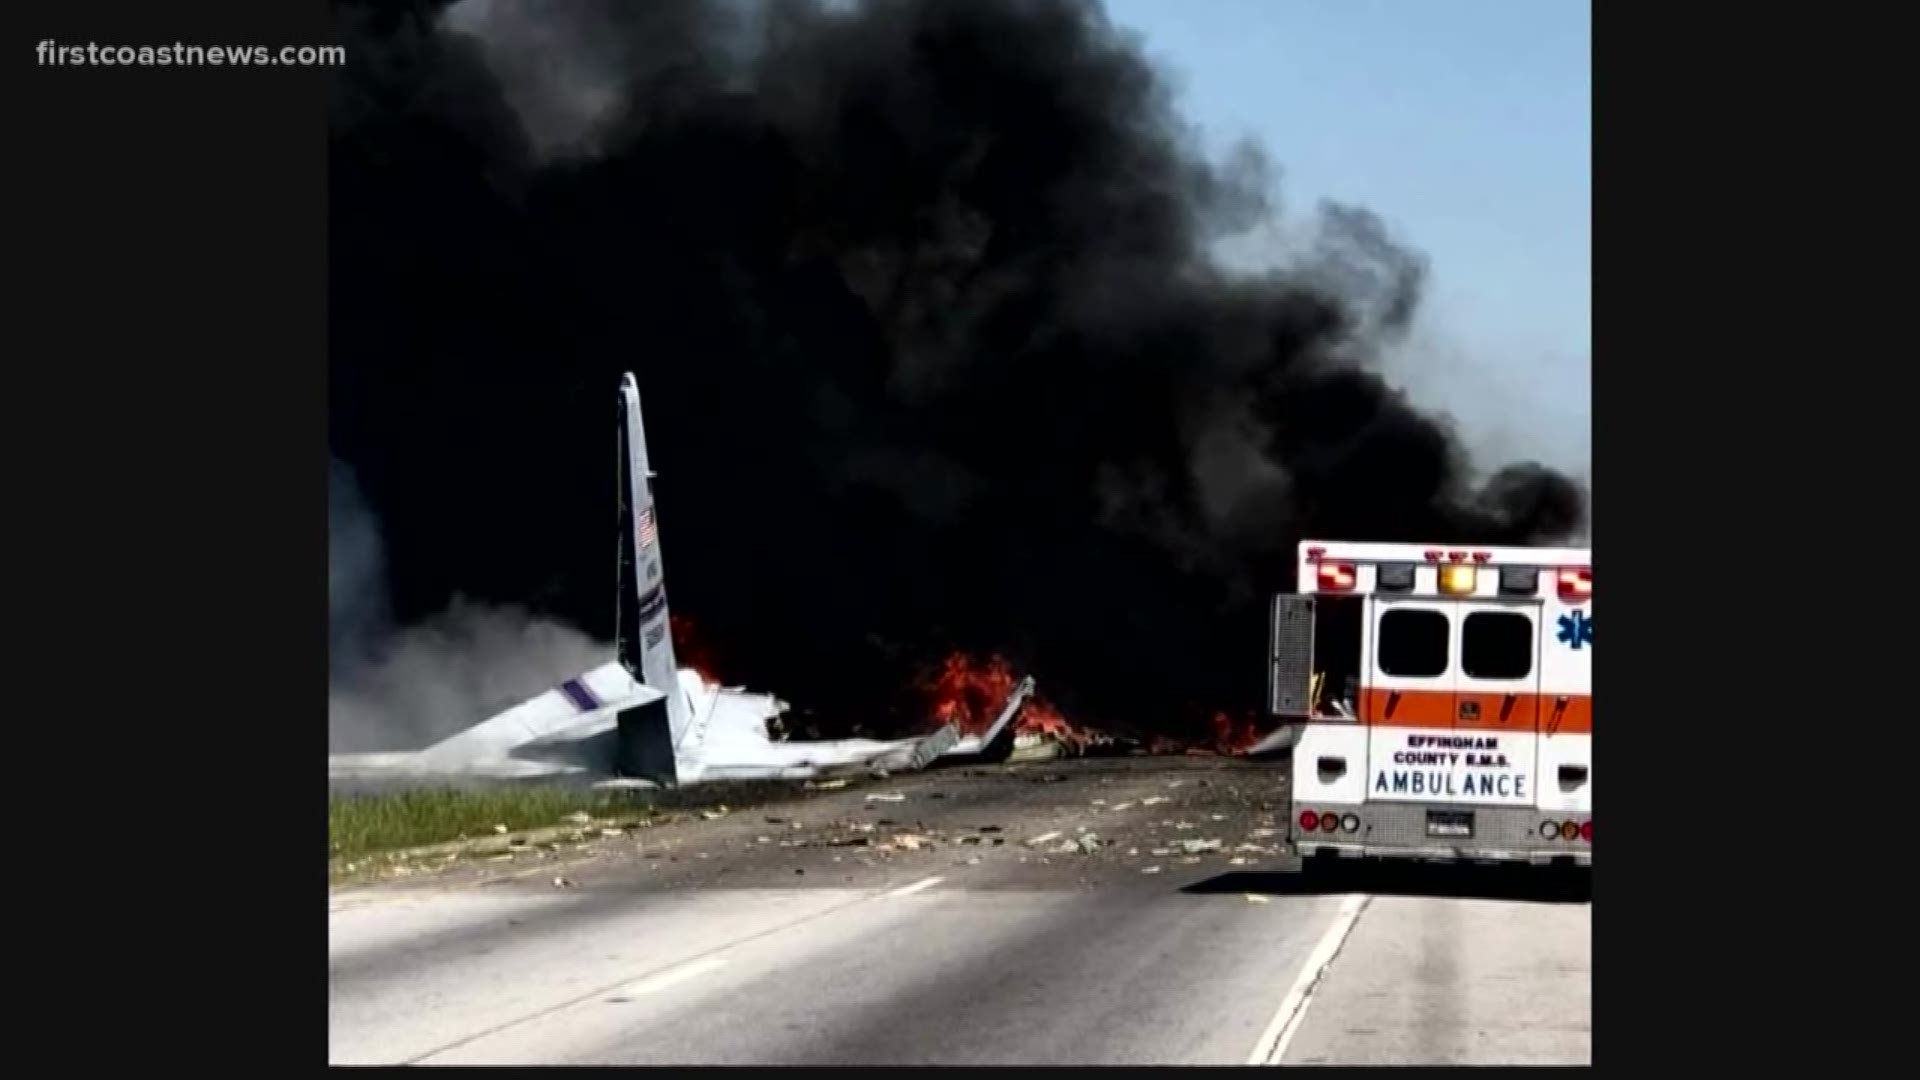 We now know the names of the crew members who were killed when the C-130 crashed in Georgia, killing all nine people on board.